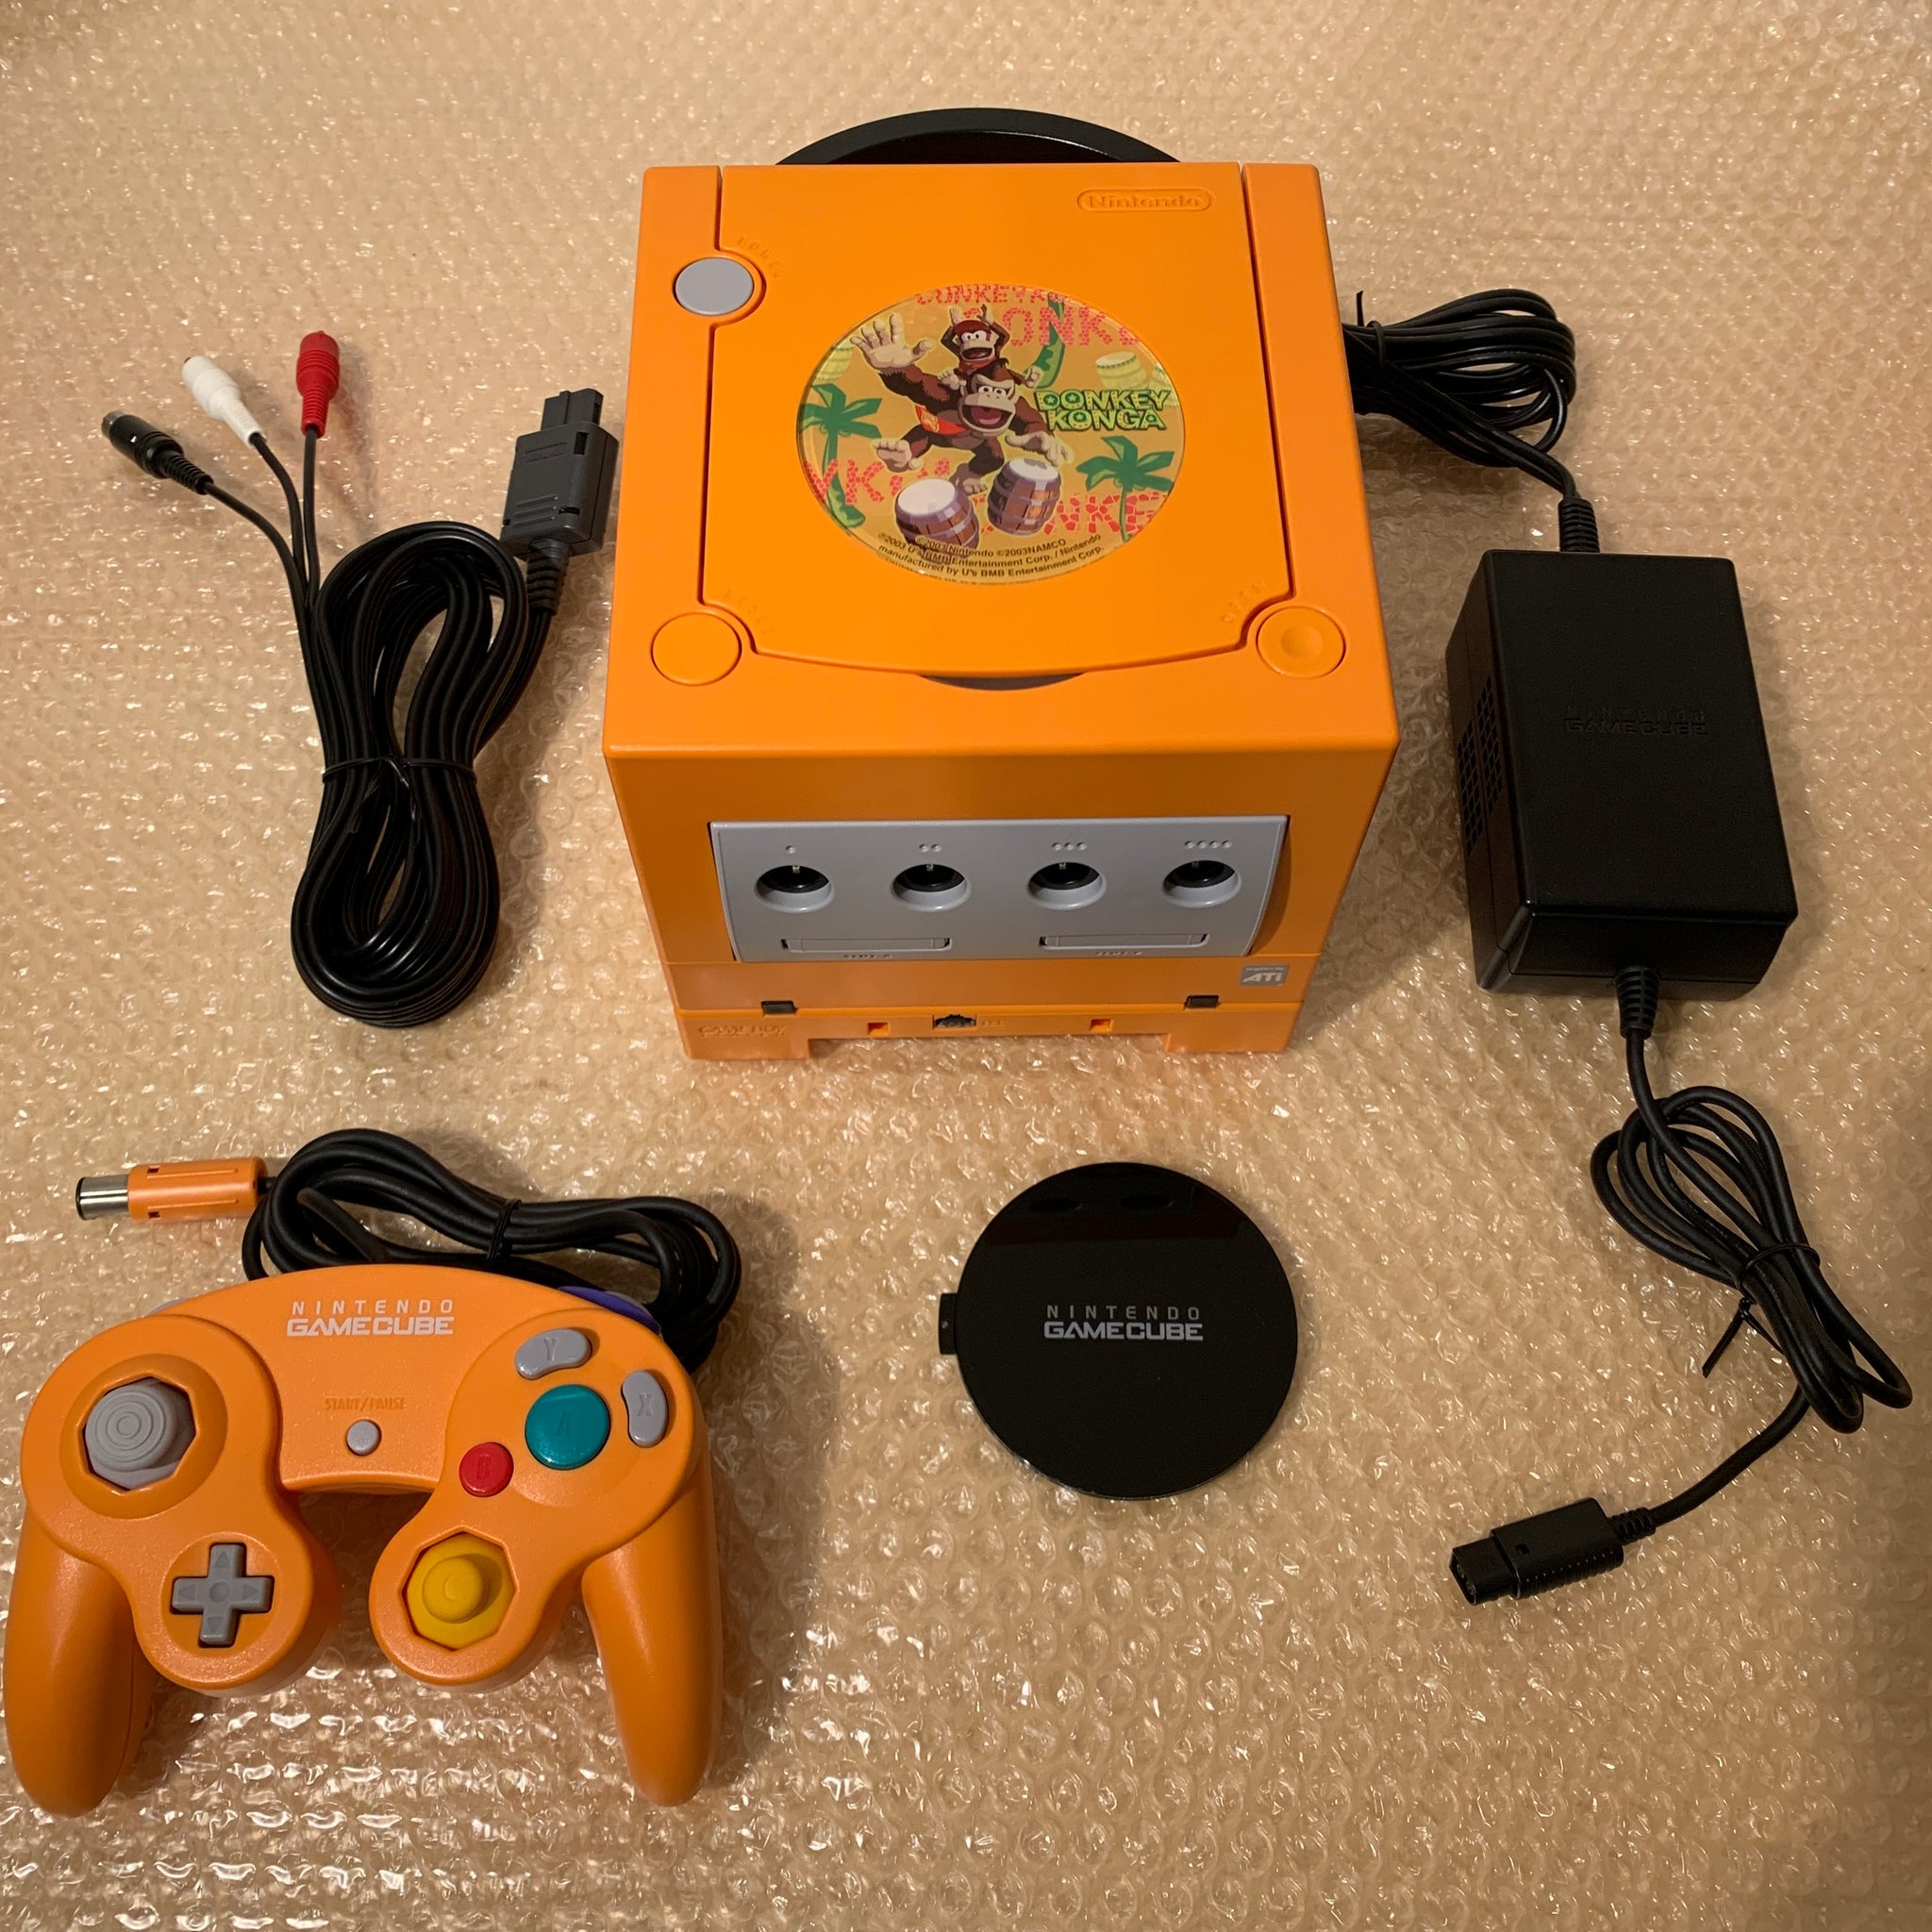 Champagne ledig stilling Problem Orange Gamecube with Gameboy Player, S-Video cable + Picoboot - RetroAsia